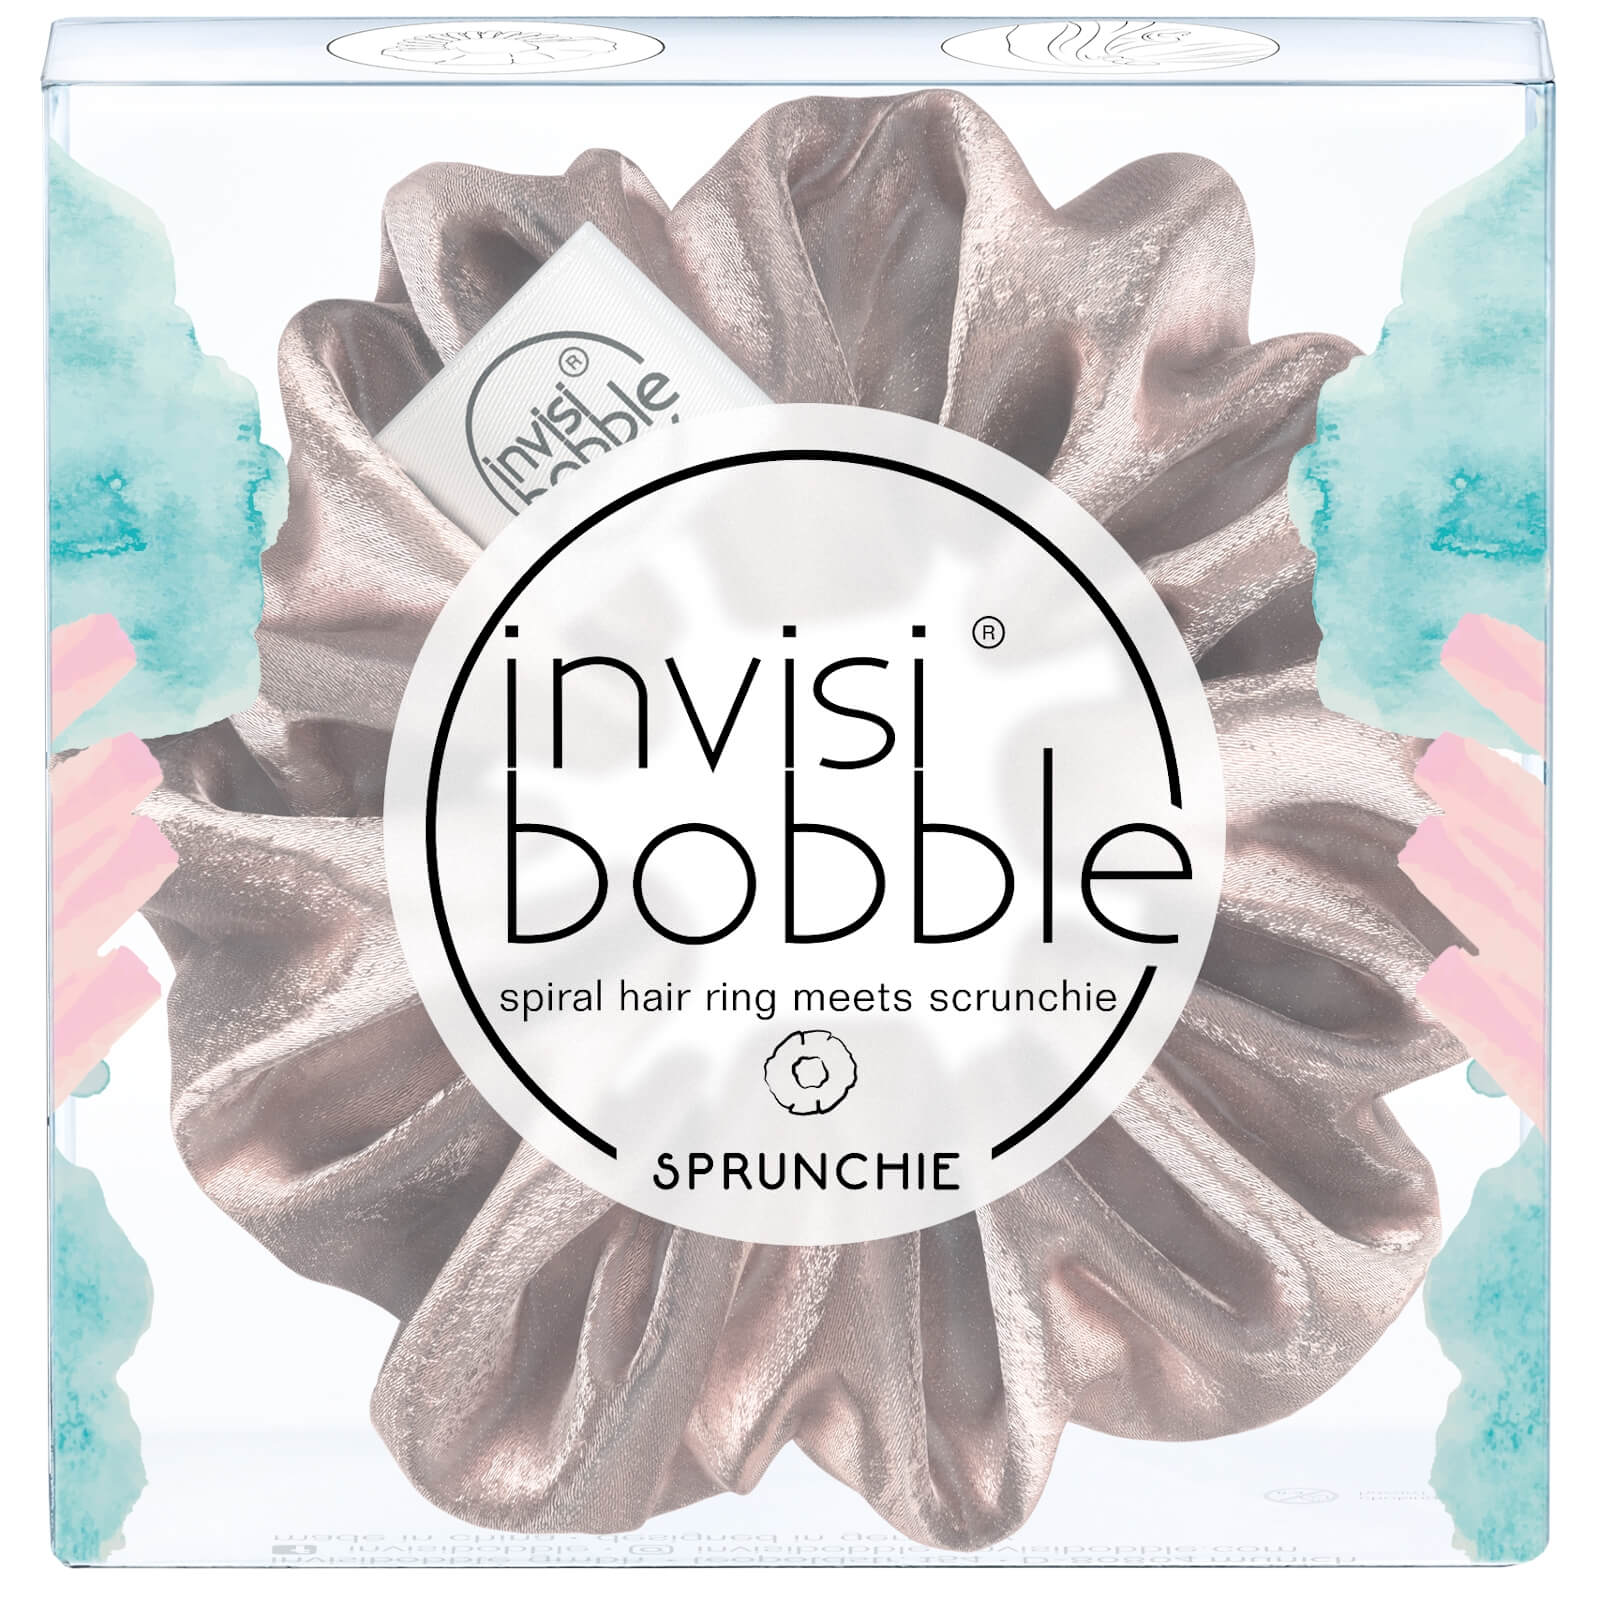 Exclusive invisibobble Pun Intended Sprunchie - Pink Satin